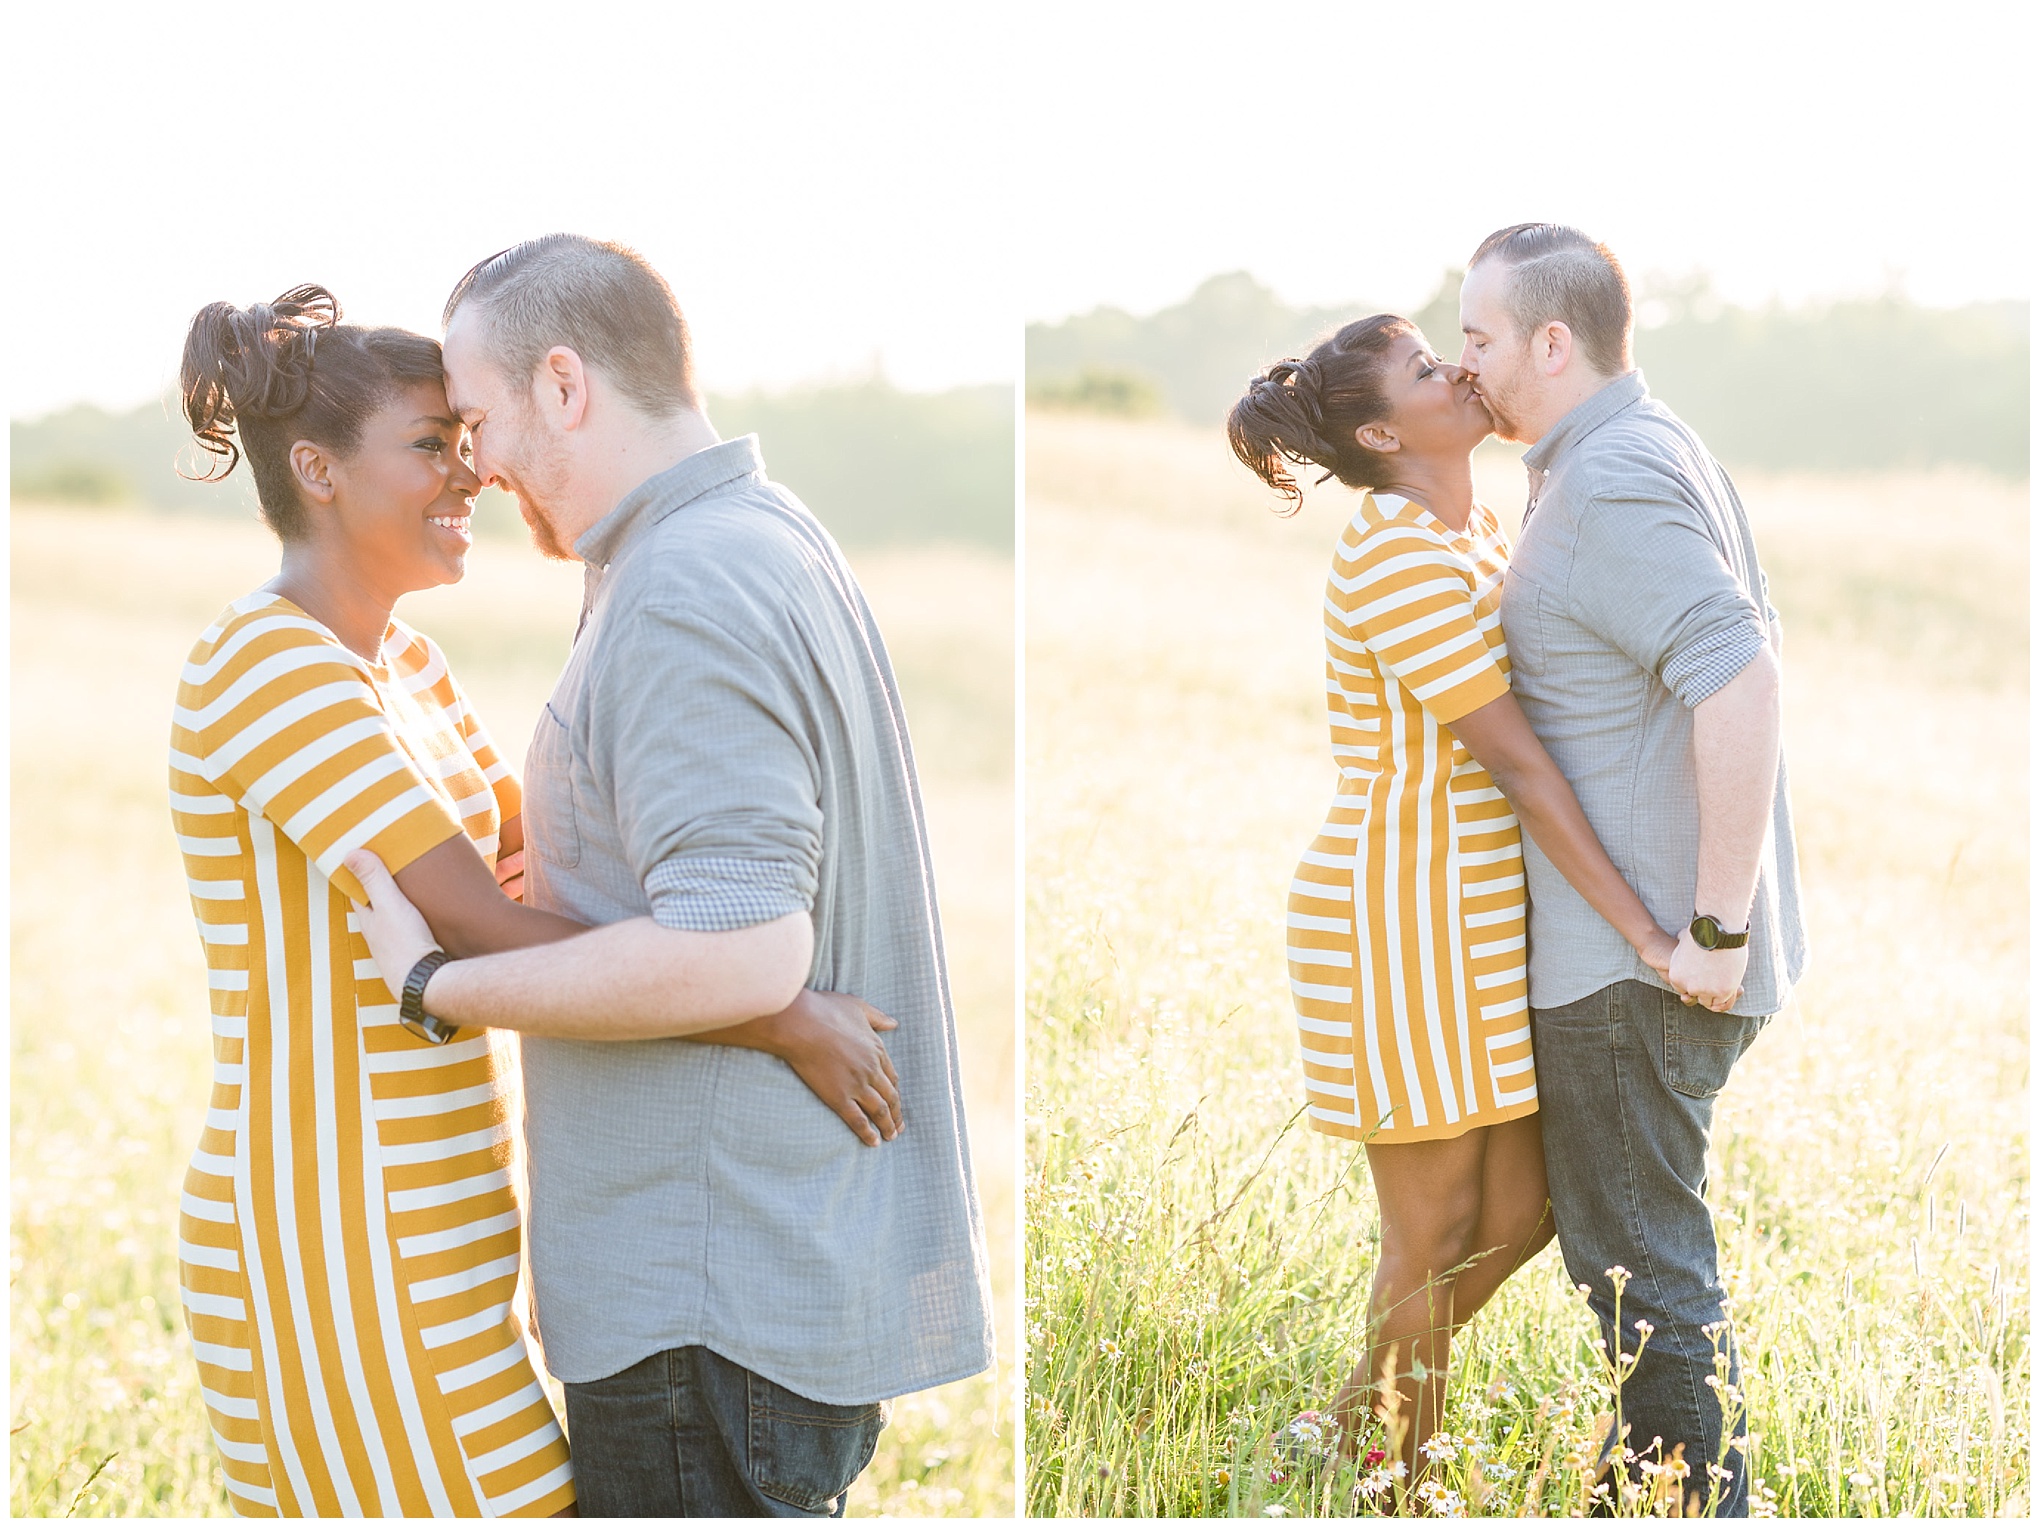 stone house engagement session, Manassas, Manassas National Battlefield Park, battlefield, outdoor engagement photos, engagement photos, Virginia engagement photos, Virginia engagement photographer, northern Virginia, northern Virginia engagement photographer, Manassas photographer, Manassas engagement photographer, natural light engagement photos, magic hour portriats, morning magic hour, engagement photos poses, engagement photos ideas, kissing, June engagement, open field, yellow and white striped tshirt dress